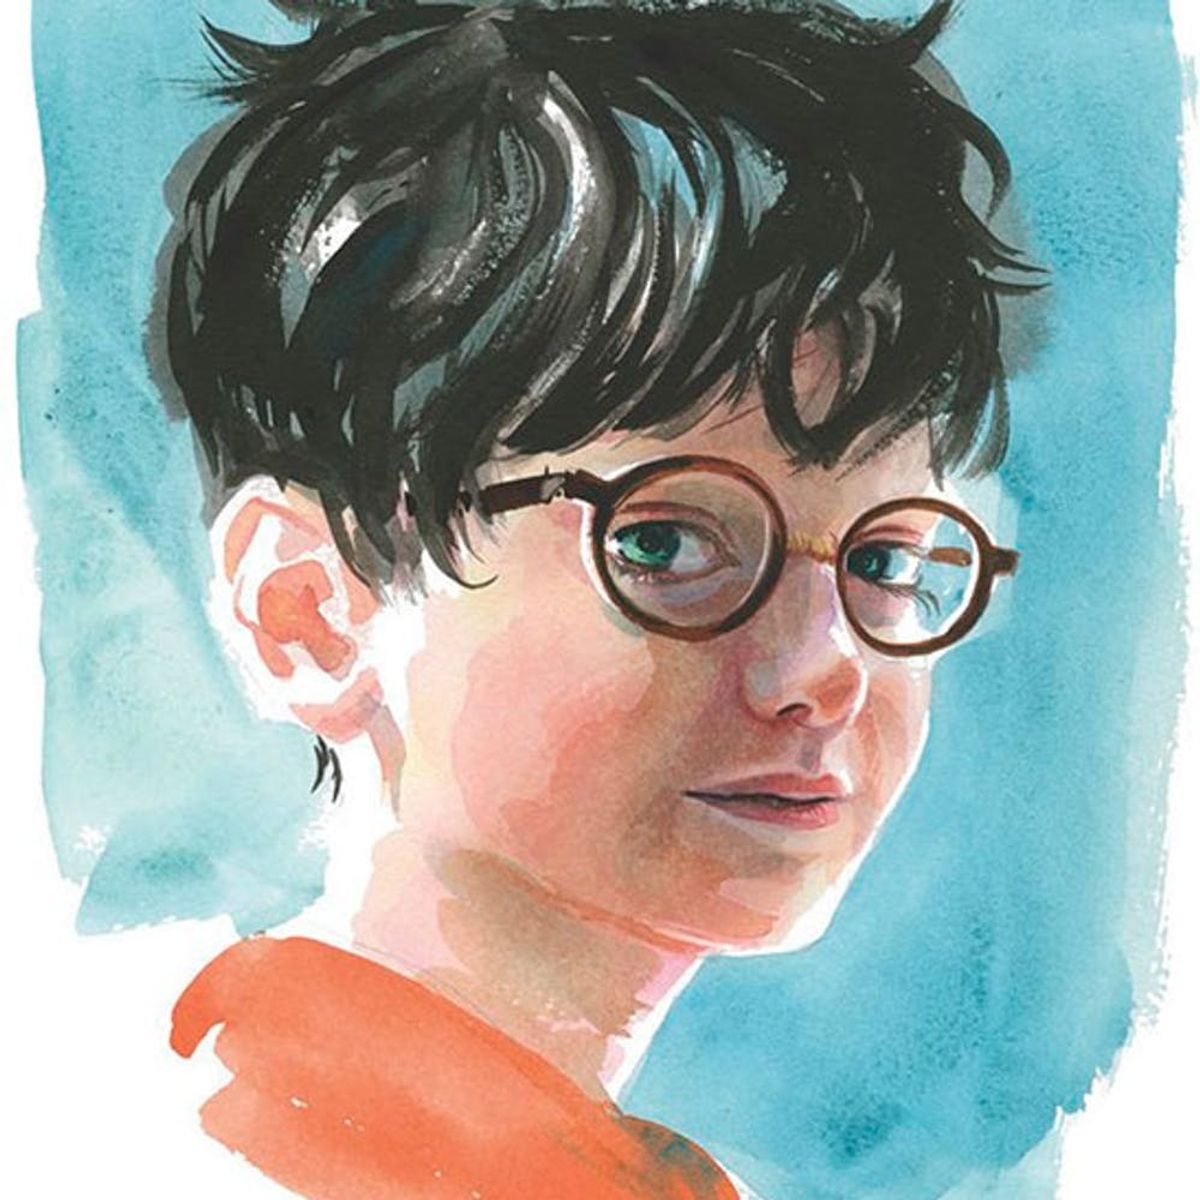 The Harry Potter Series Just Got a Gorgeous Illustrated Makeover